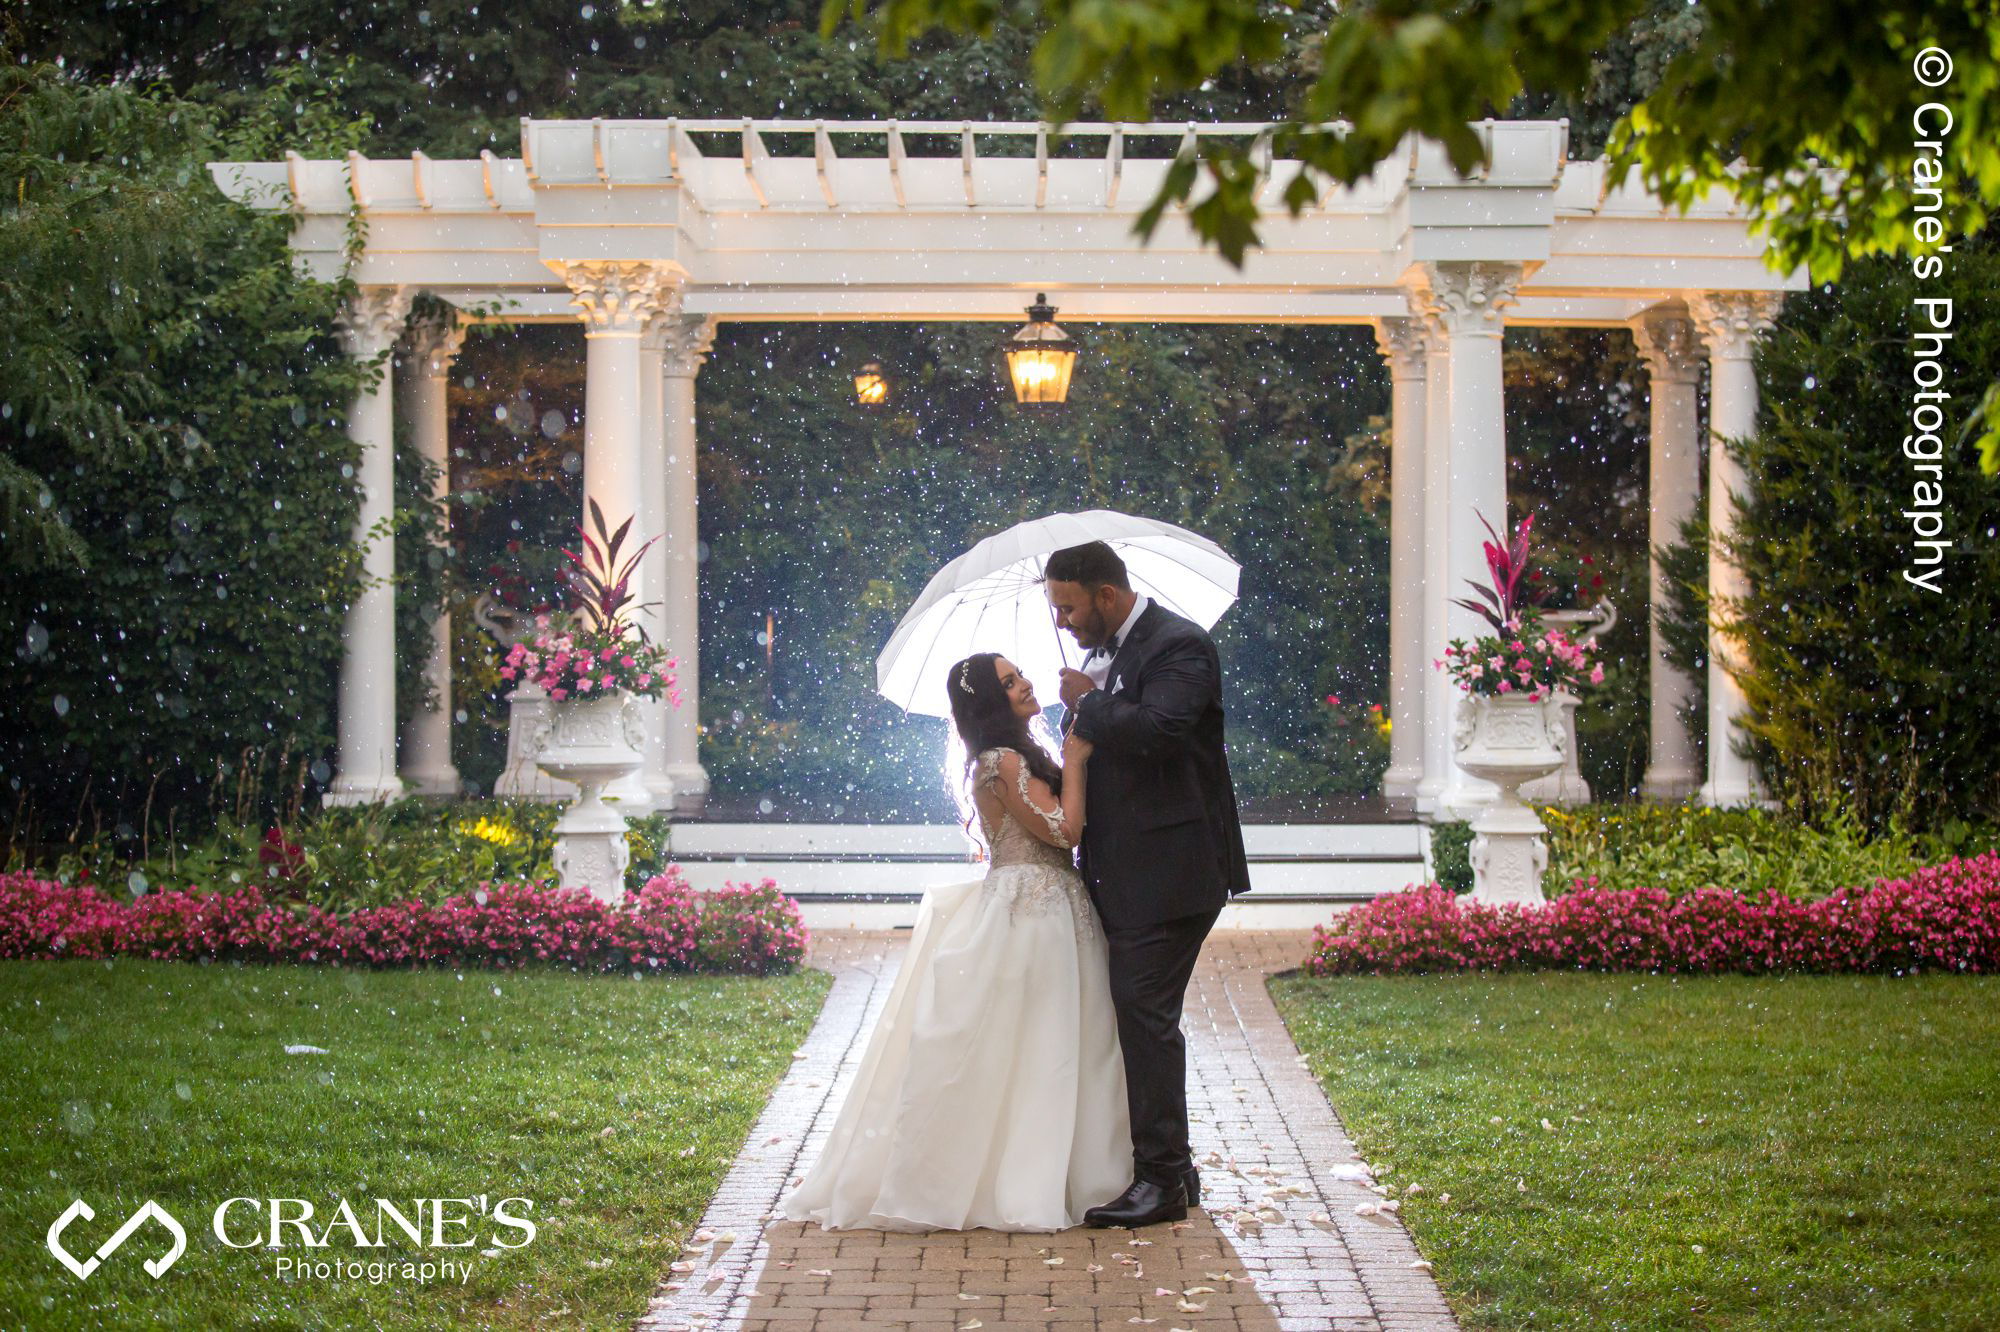 Bride and groom hold umbrella on a rainy wedding day at Haley Mansion